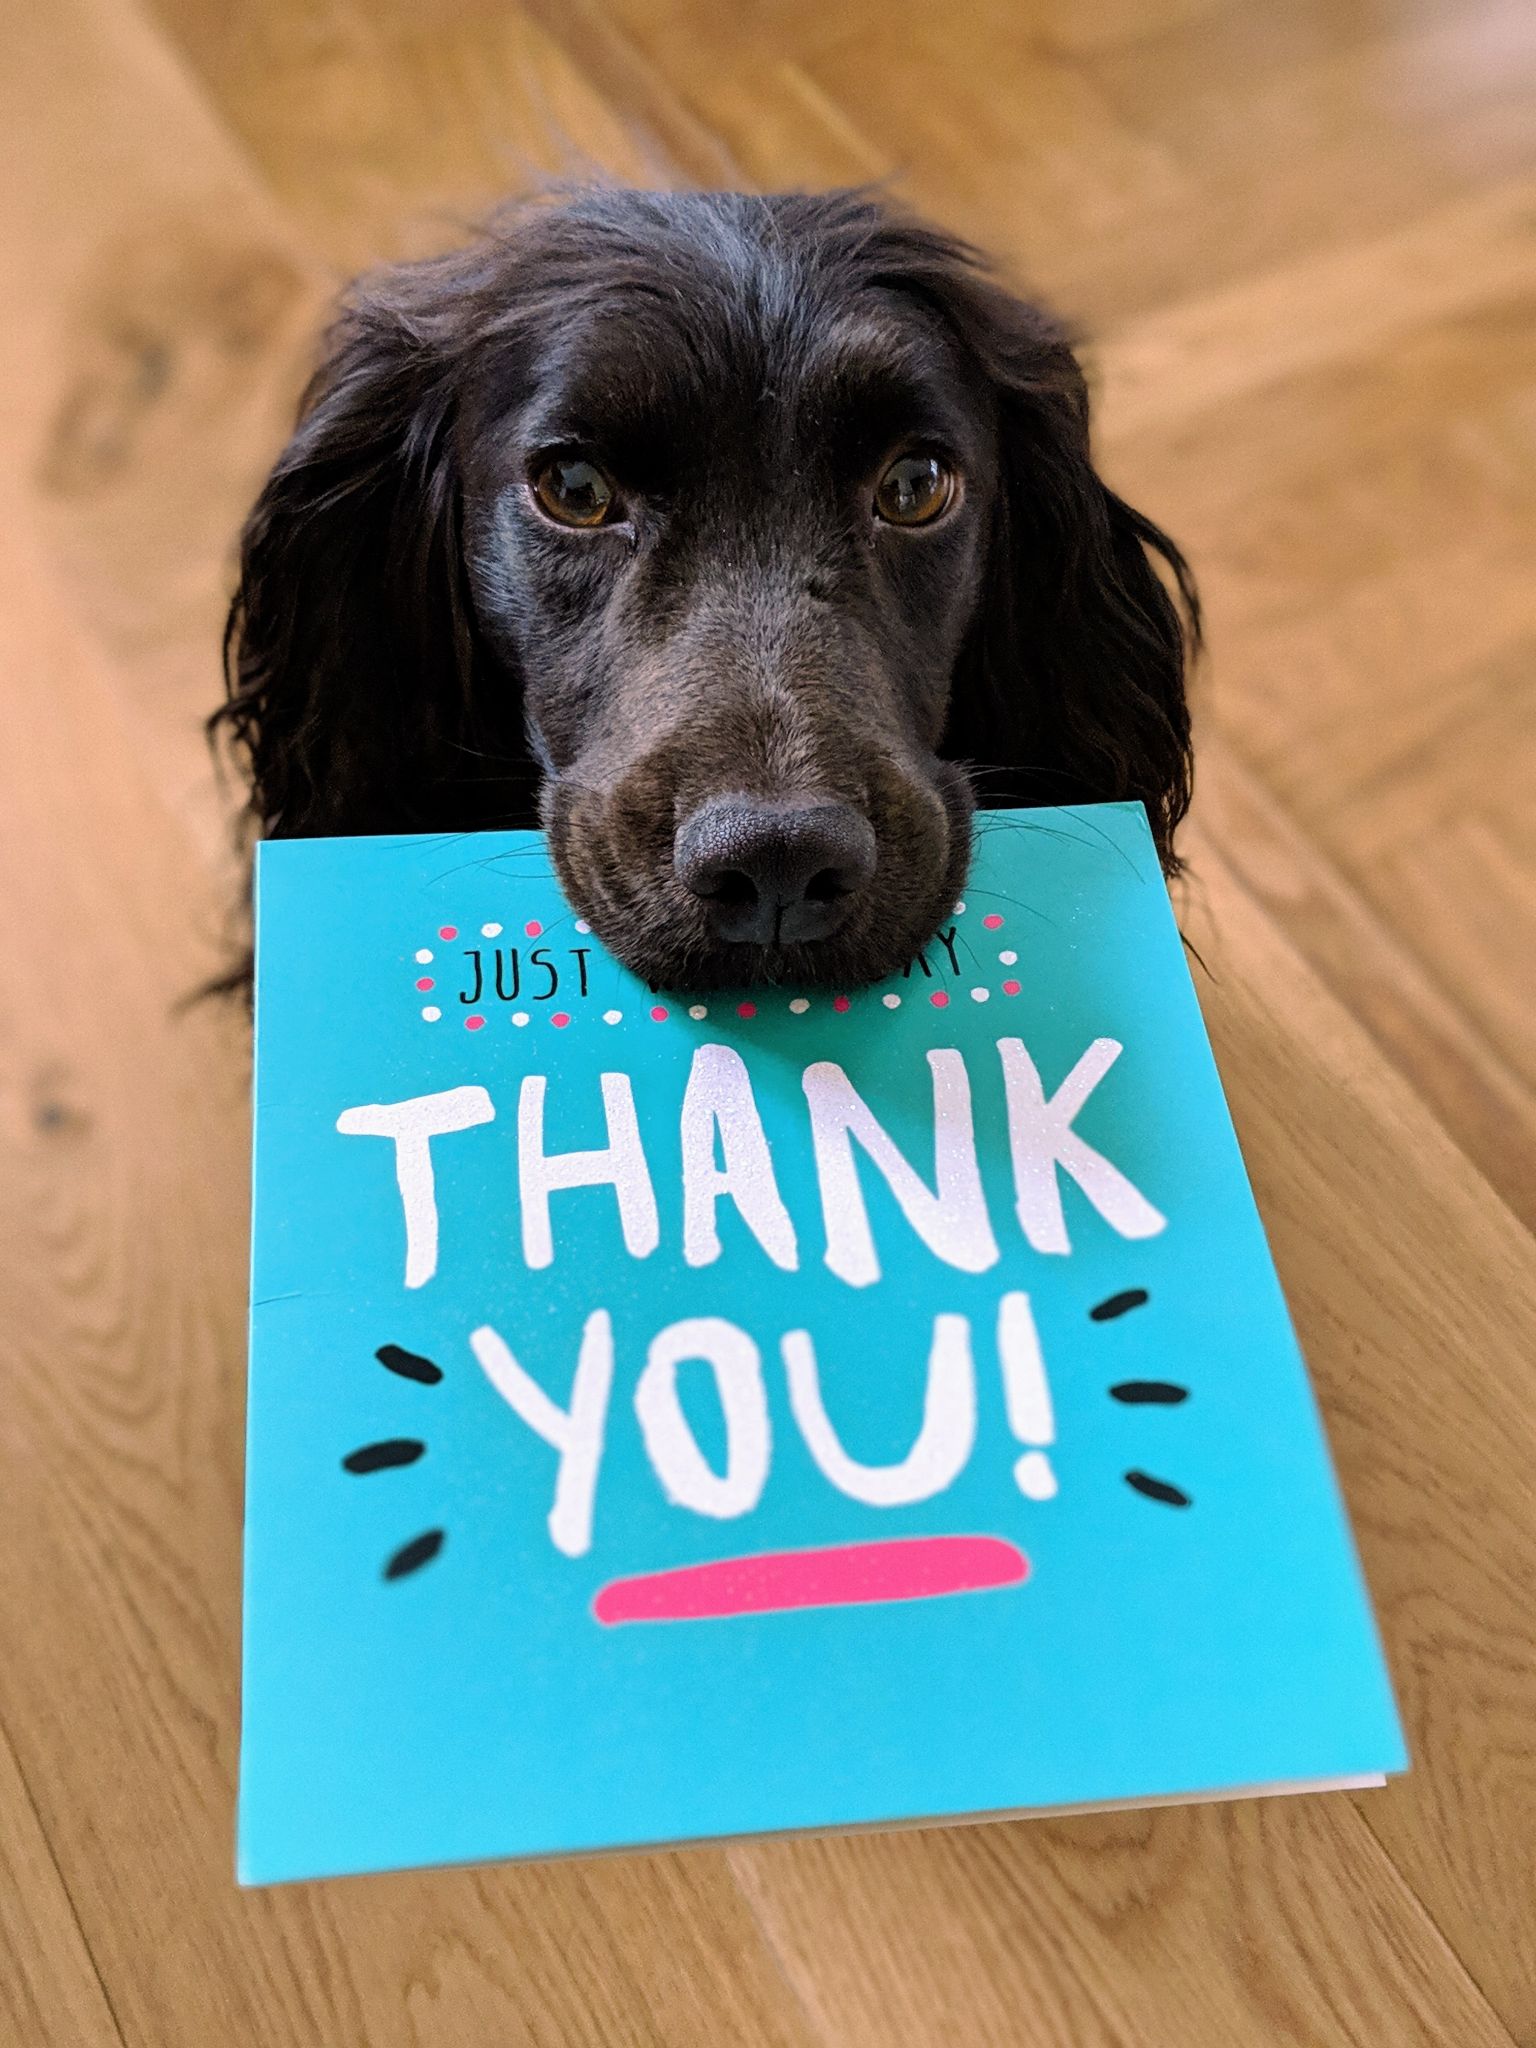 A picture of a black dog, staring at the camera, holding a blue greeting card in his mouth that says Thank You